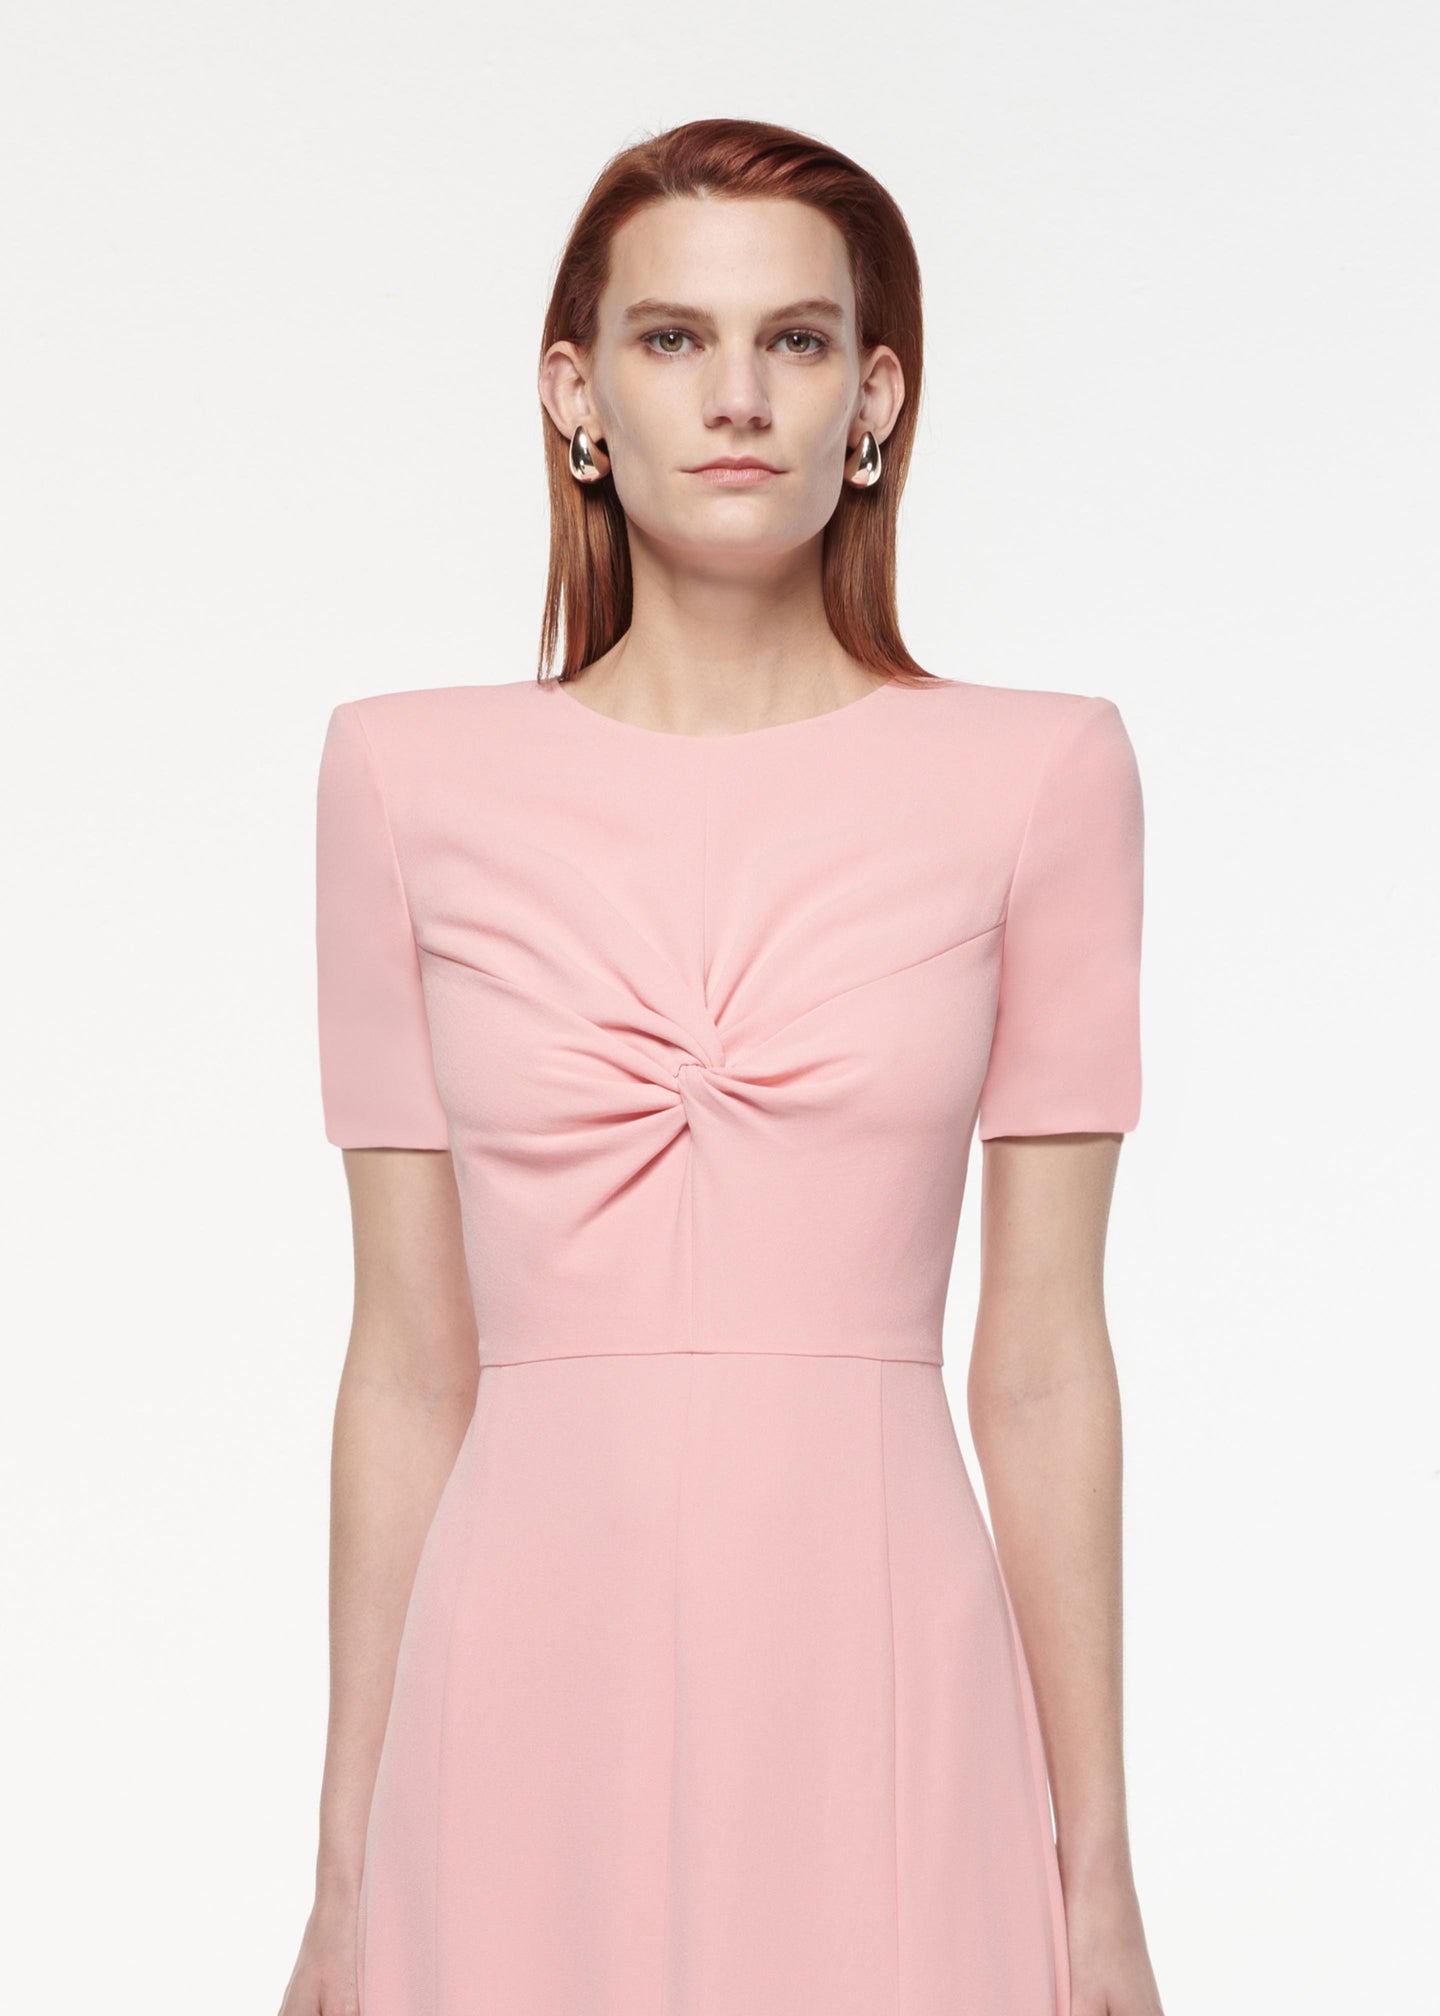 A photograph of a woman wearing a Short Sleeve Light Cady Midi Dress in Pink